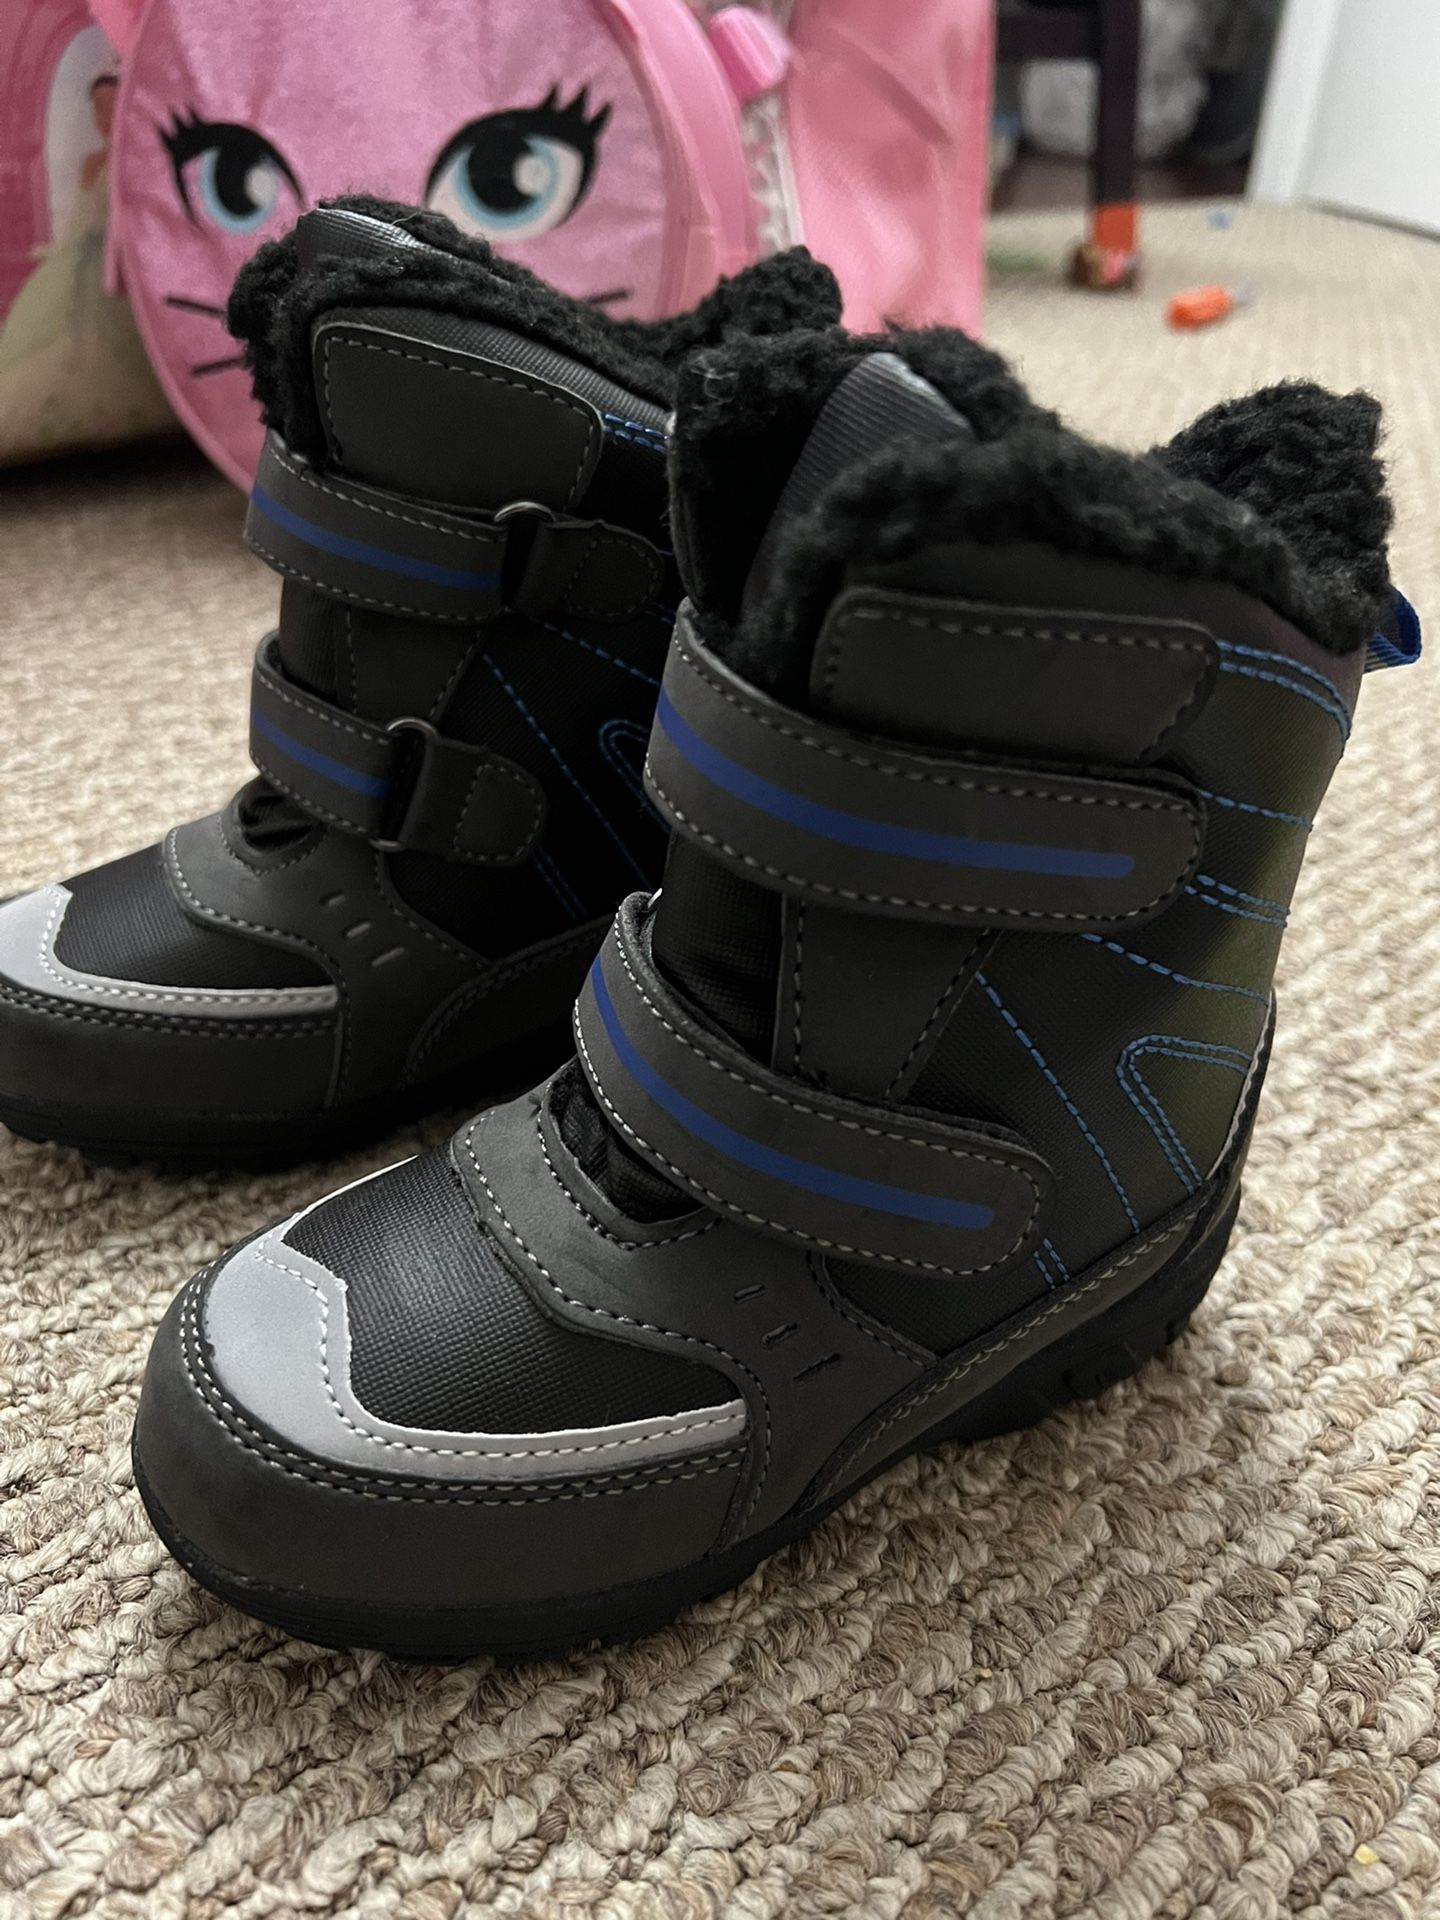 New Snow Boots -Kids size 9